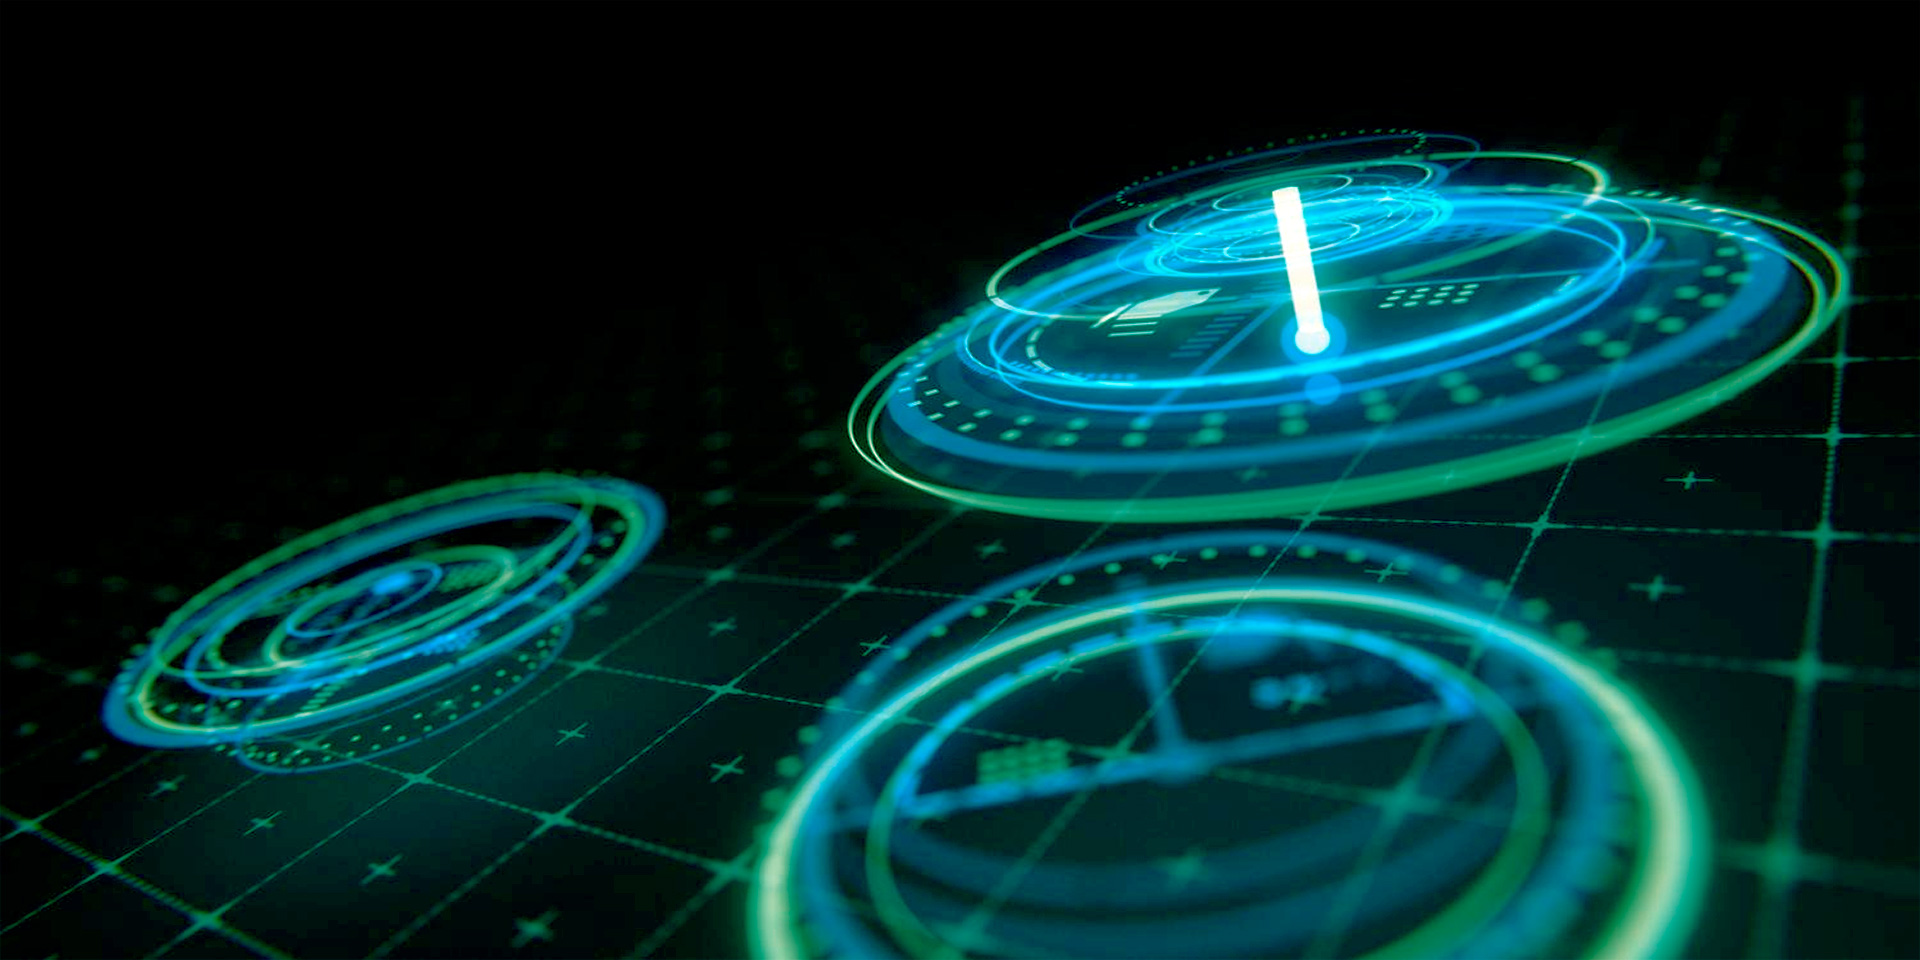 Holographic Displays in Modern Tech